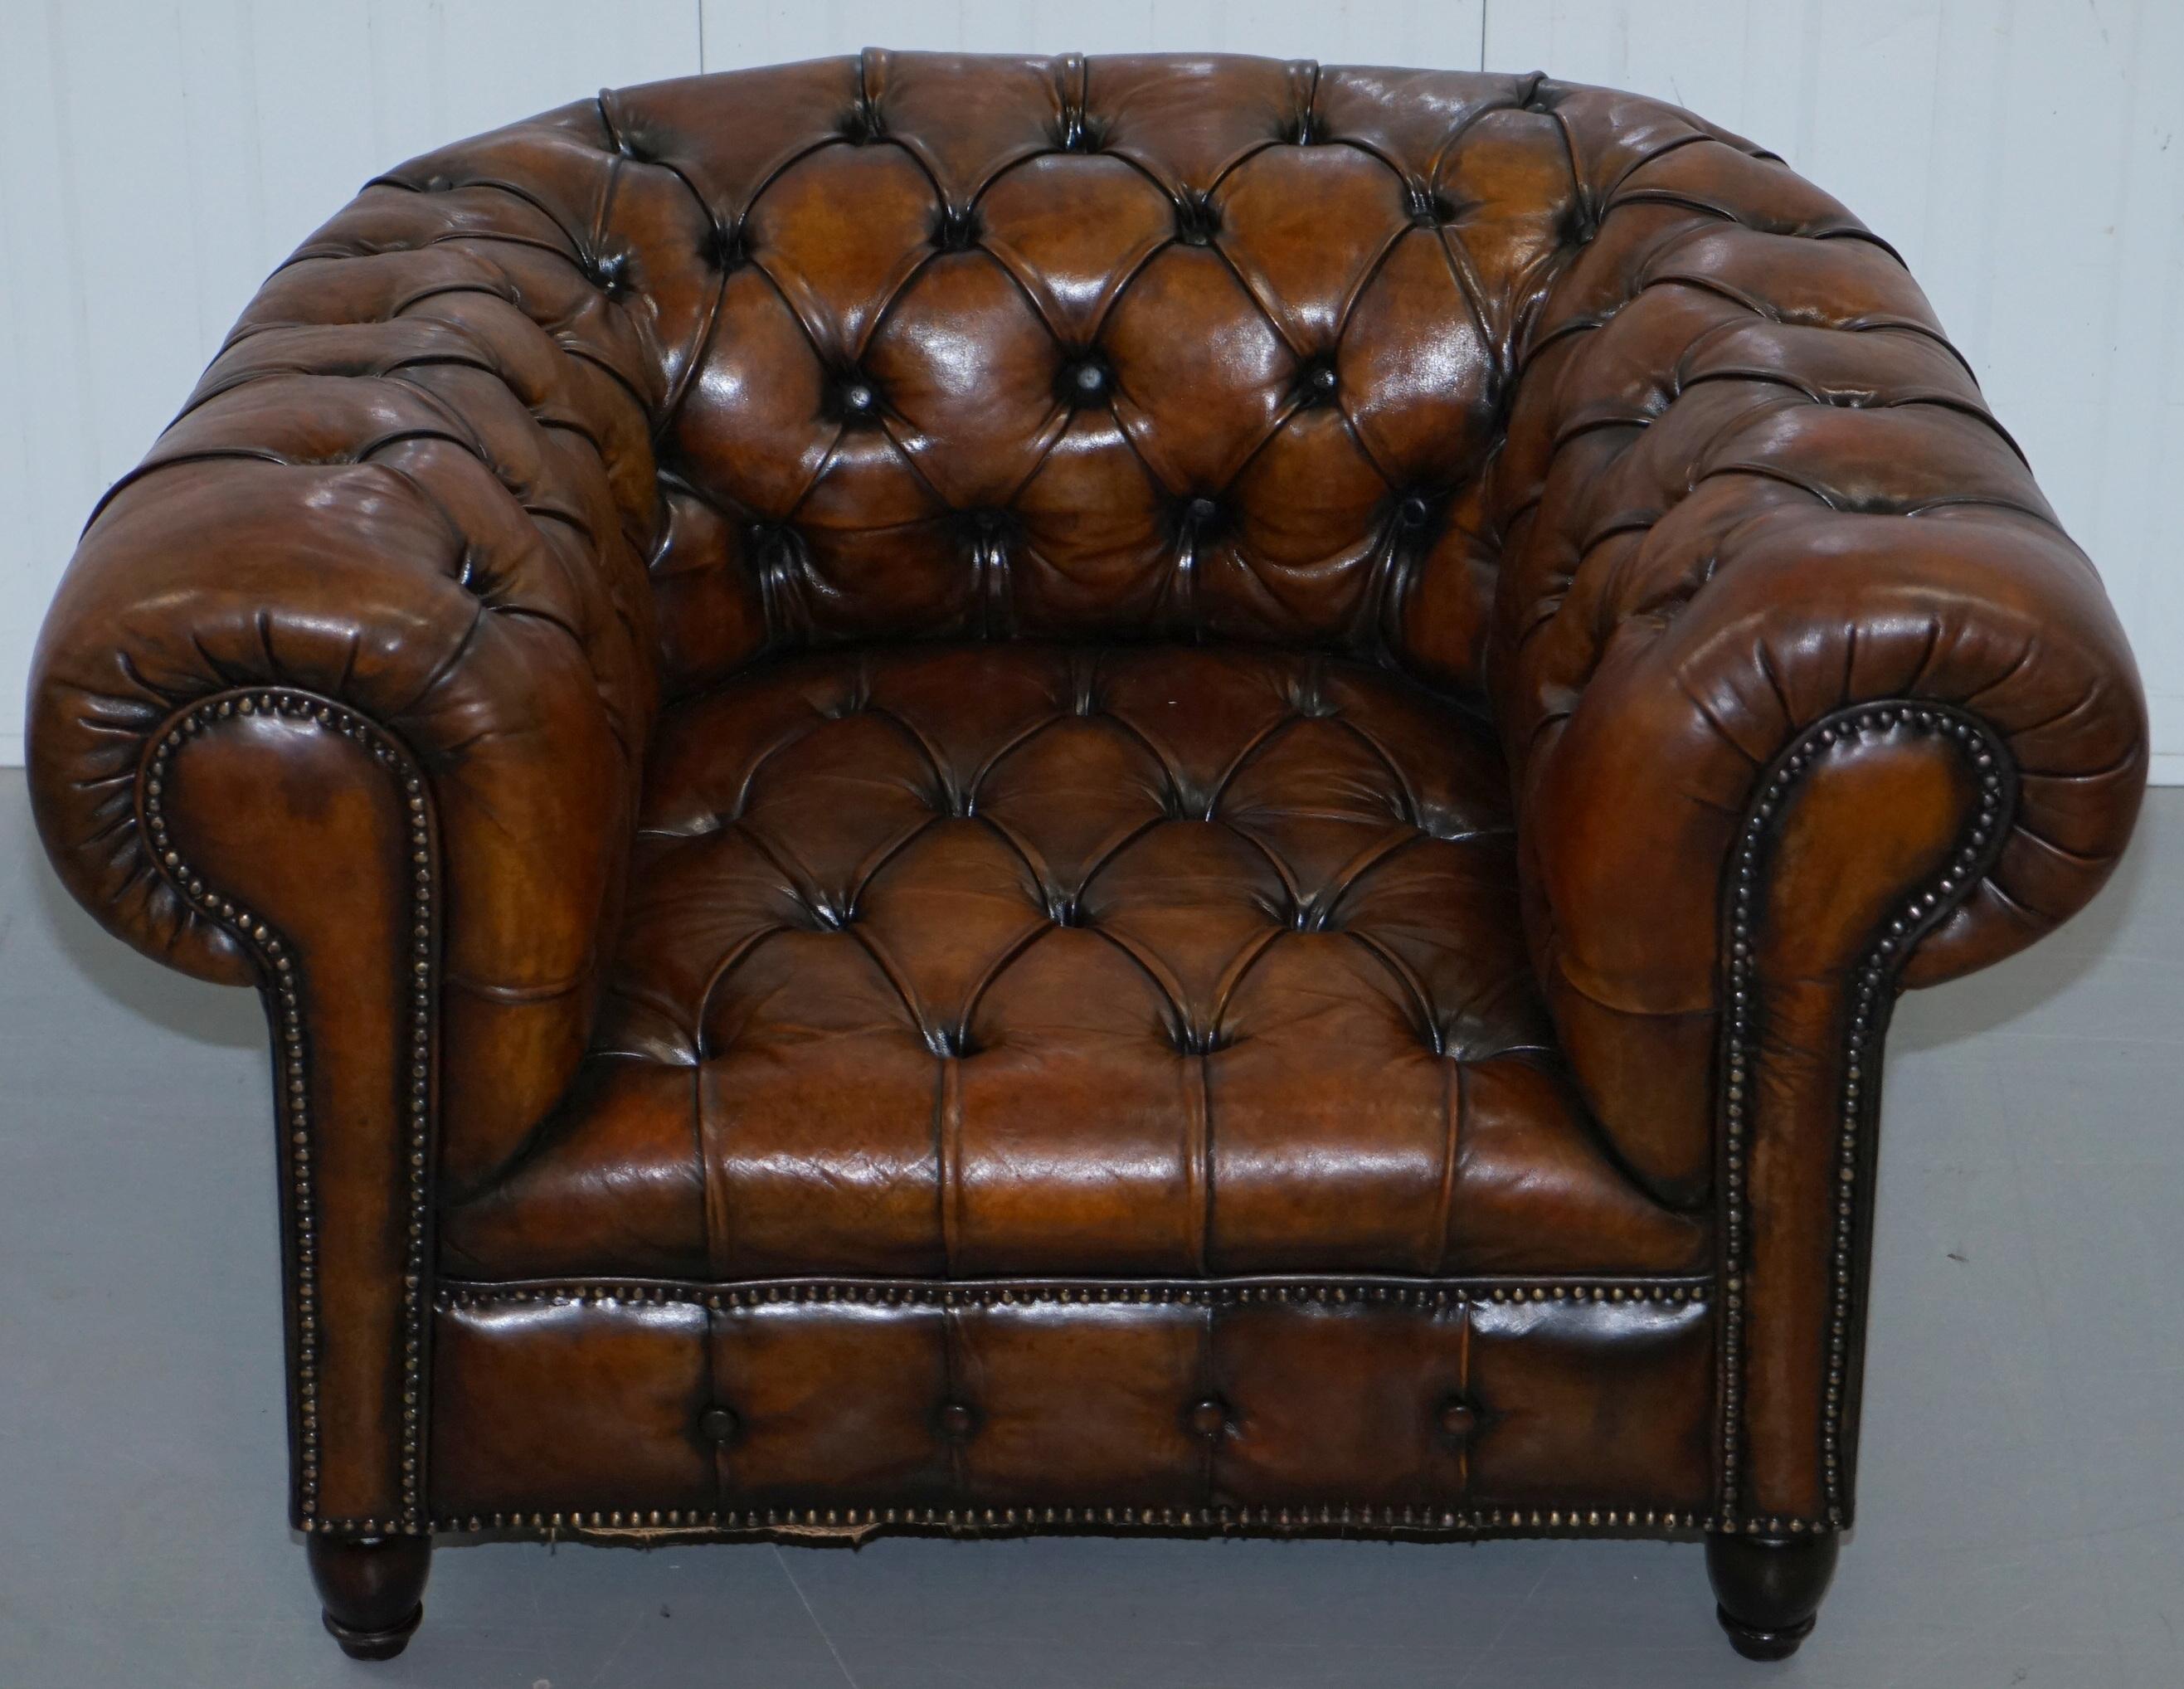 We are delighted to offer for sale this stunning exceptionally rare original early Victorian Cigar brown leather fully restored Chesterfield buttoned armchair

This is the model that everyone wants, it is the 100% perfect and correct oversized